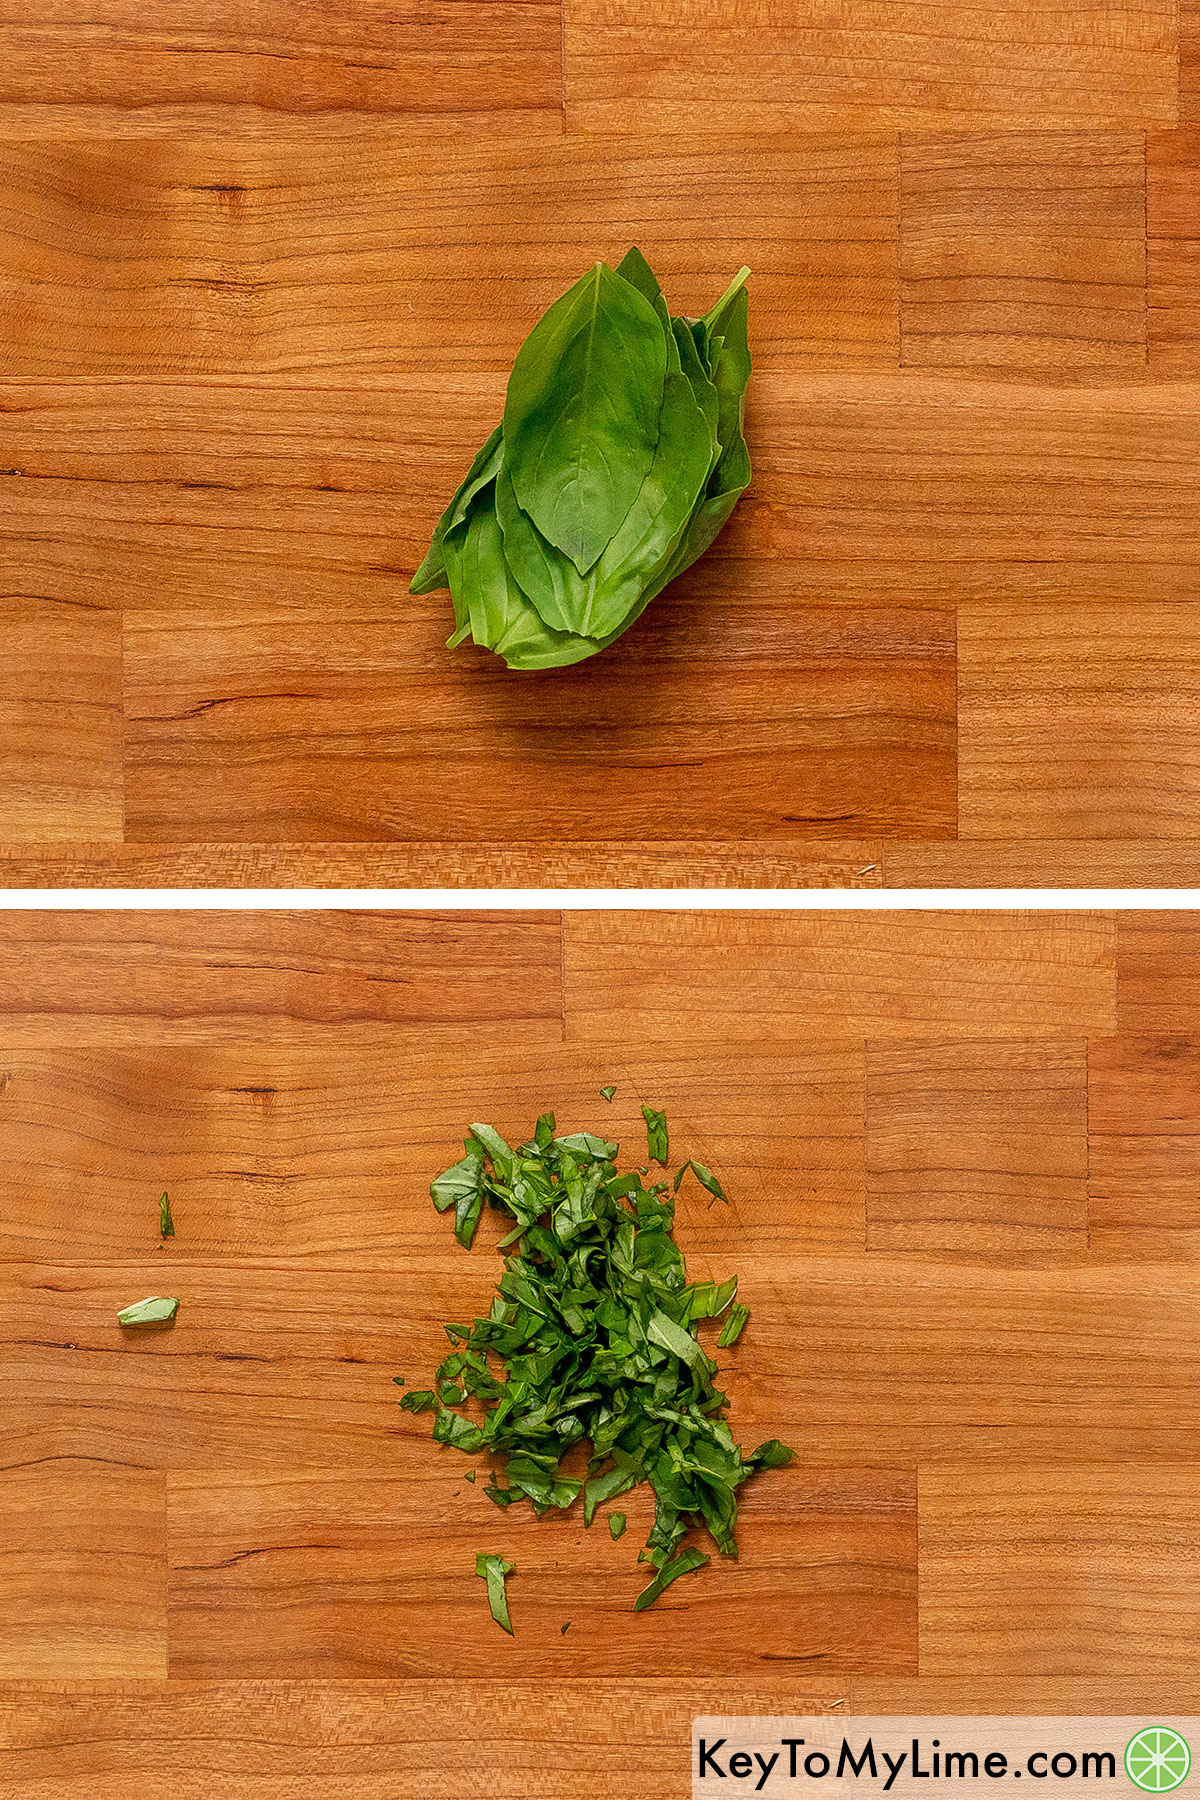 Dicing up a stacked pile of fresh basil leaves.